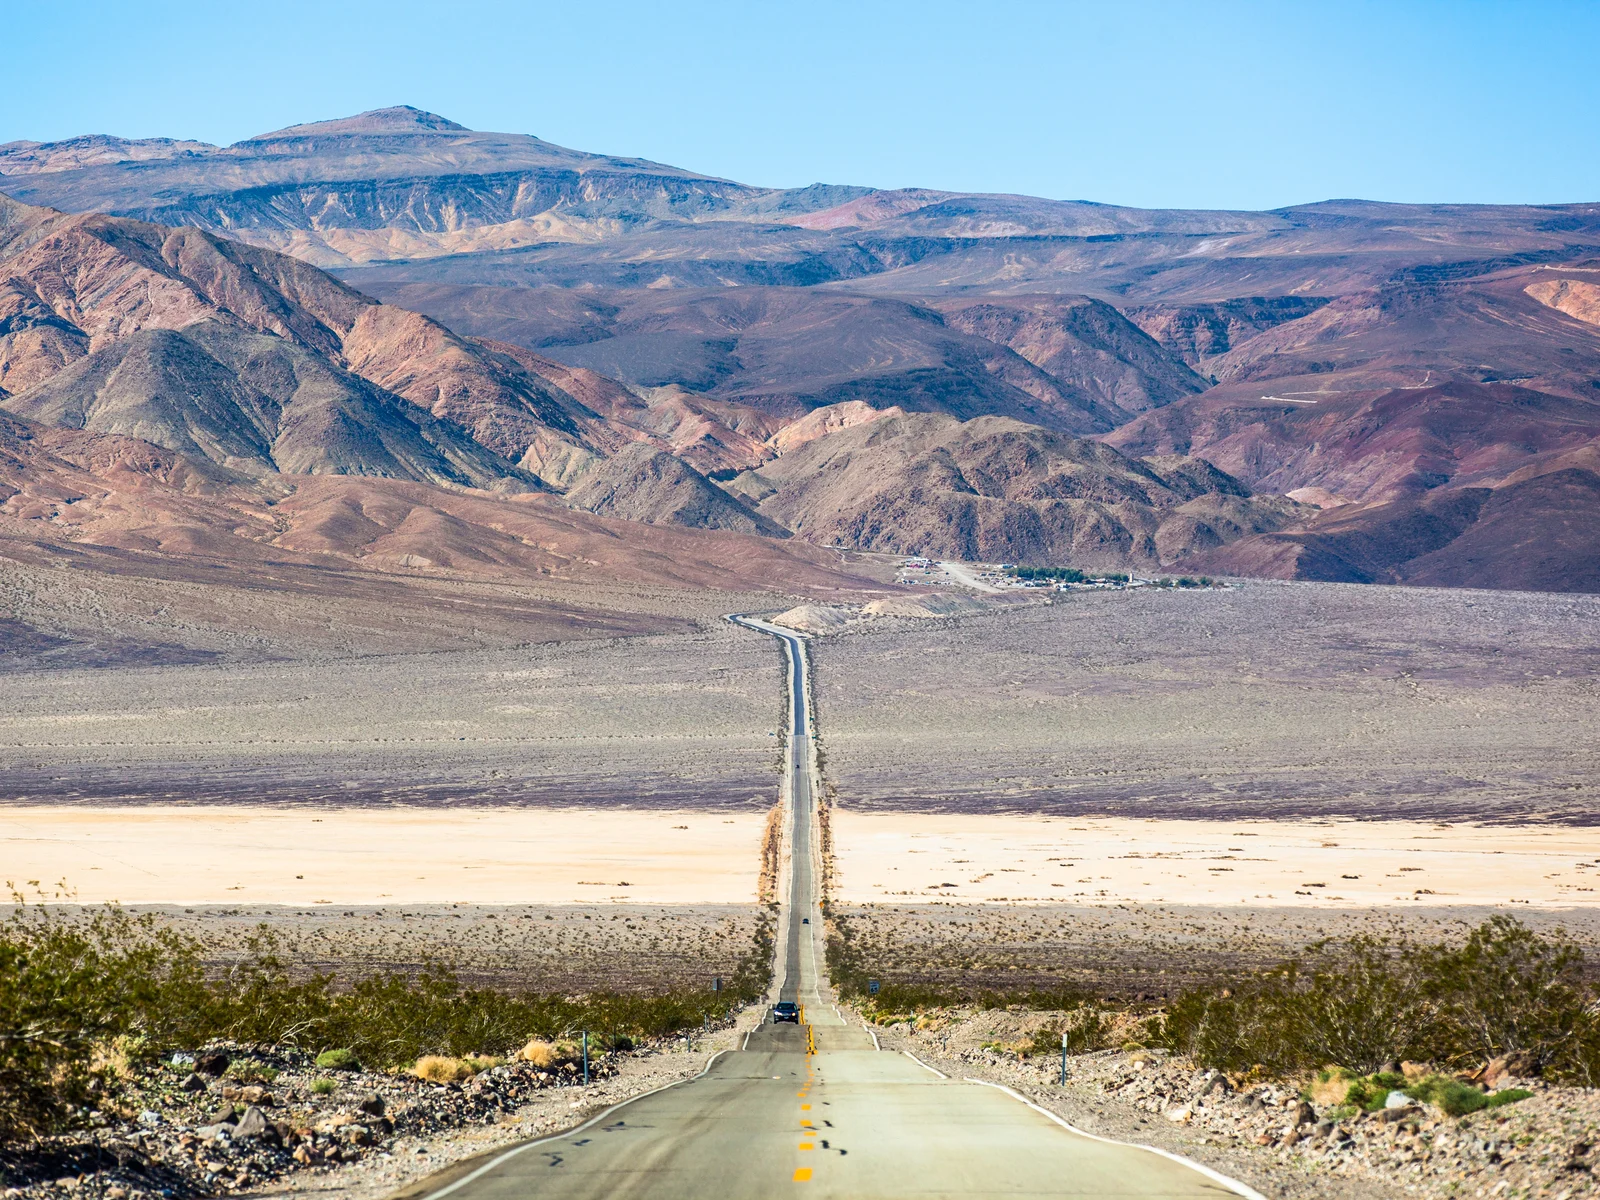 Image of Highway 190 crossing Panamint Valley during the cheapest time to visit Death Valley National Park, the Summer